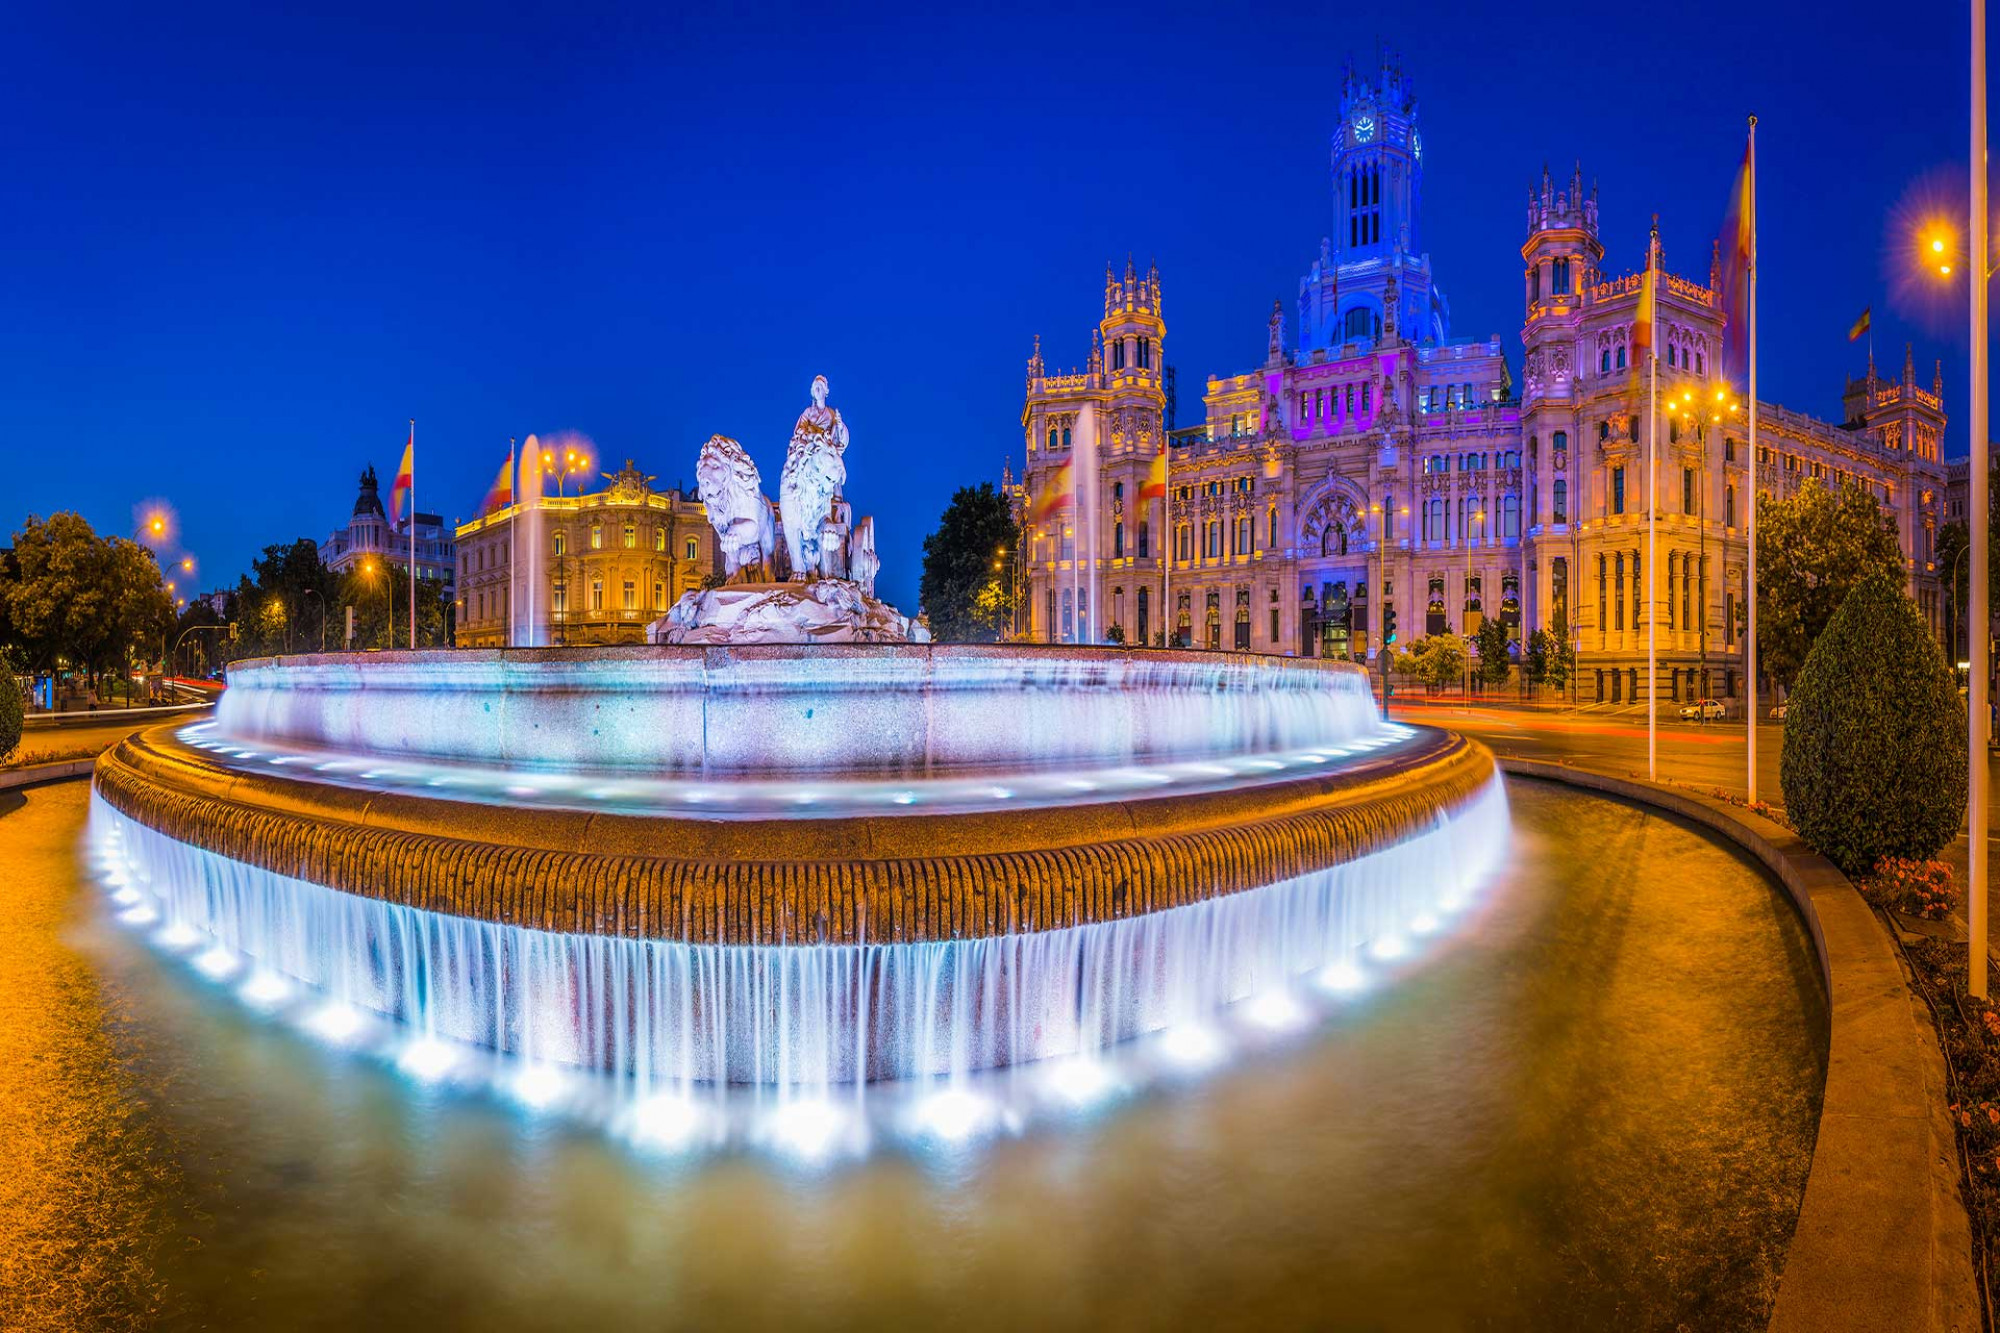 Spotlights illuminate the fountain of Cybele overlooked by the Palacio de Cibeles against the blue dusk skies in Madrid.